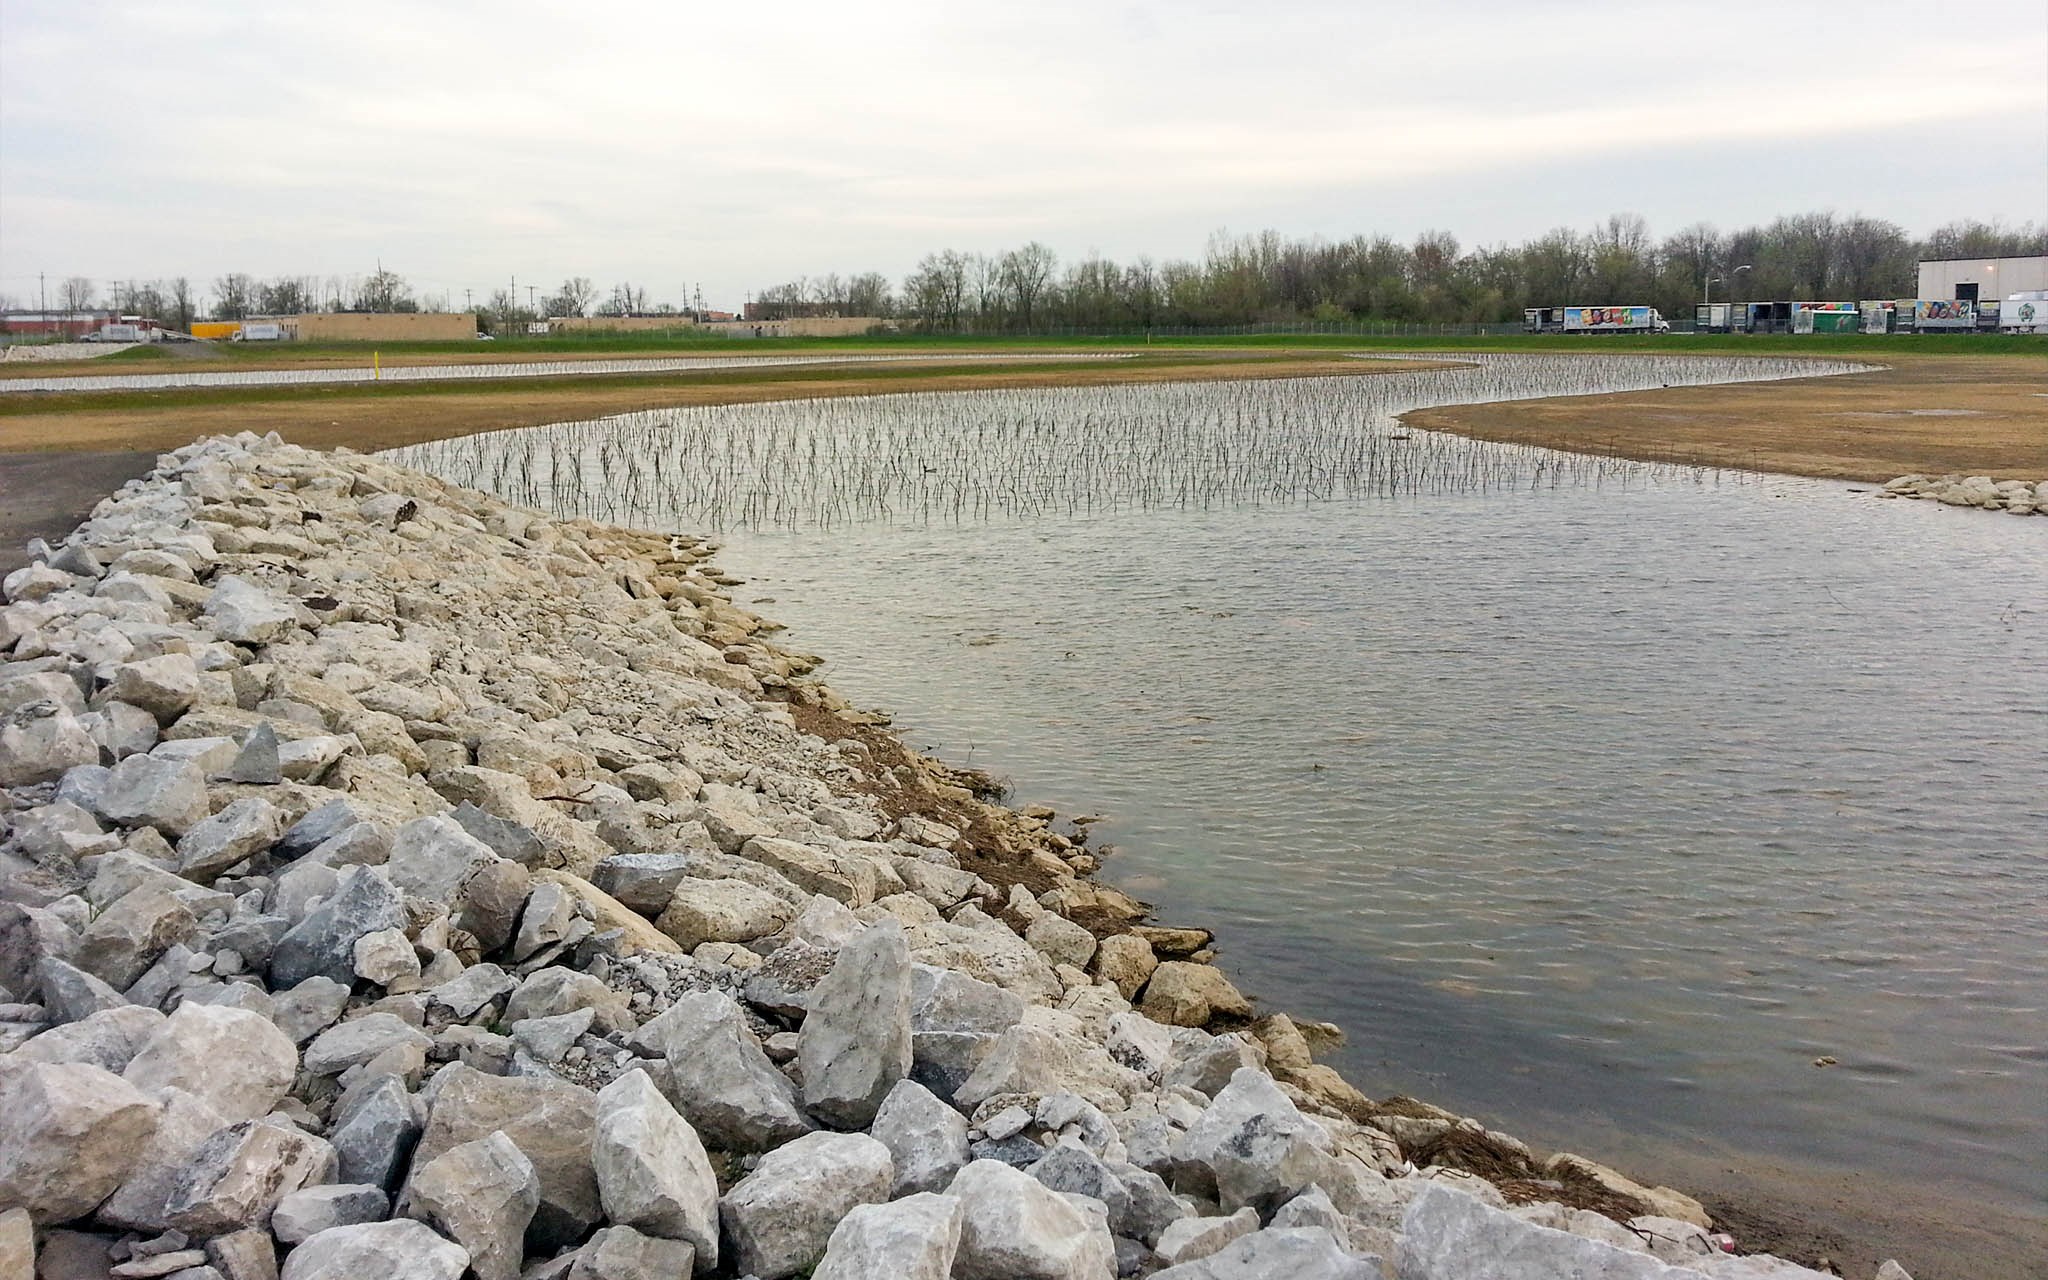 •	We evaluated potential long-term stormwater management and regulatory compliance solutions to support John Glenn Columbus International Airport’s future development goals.